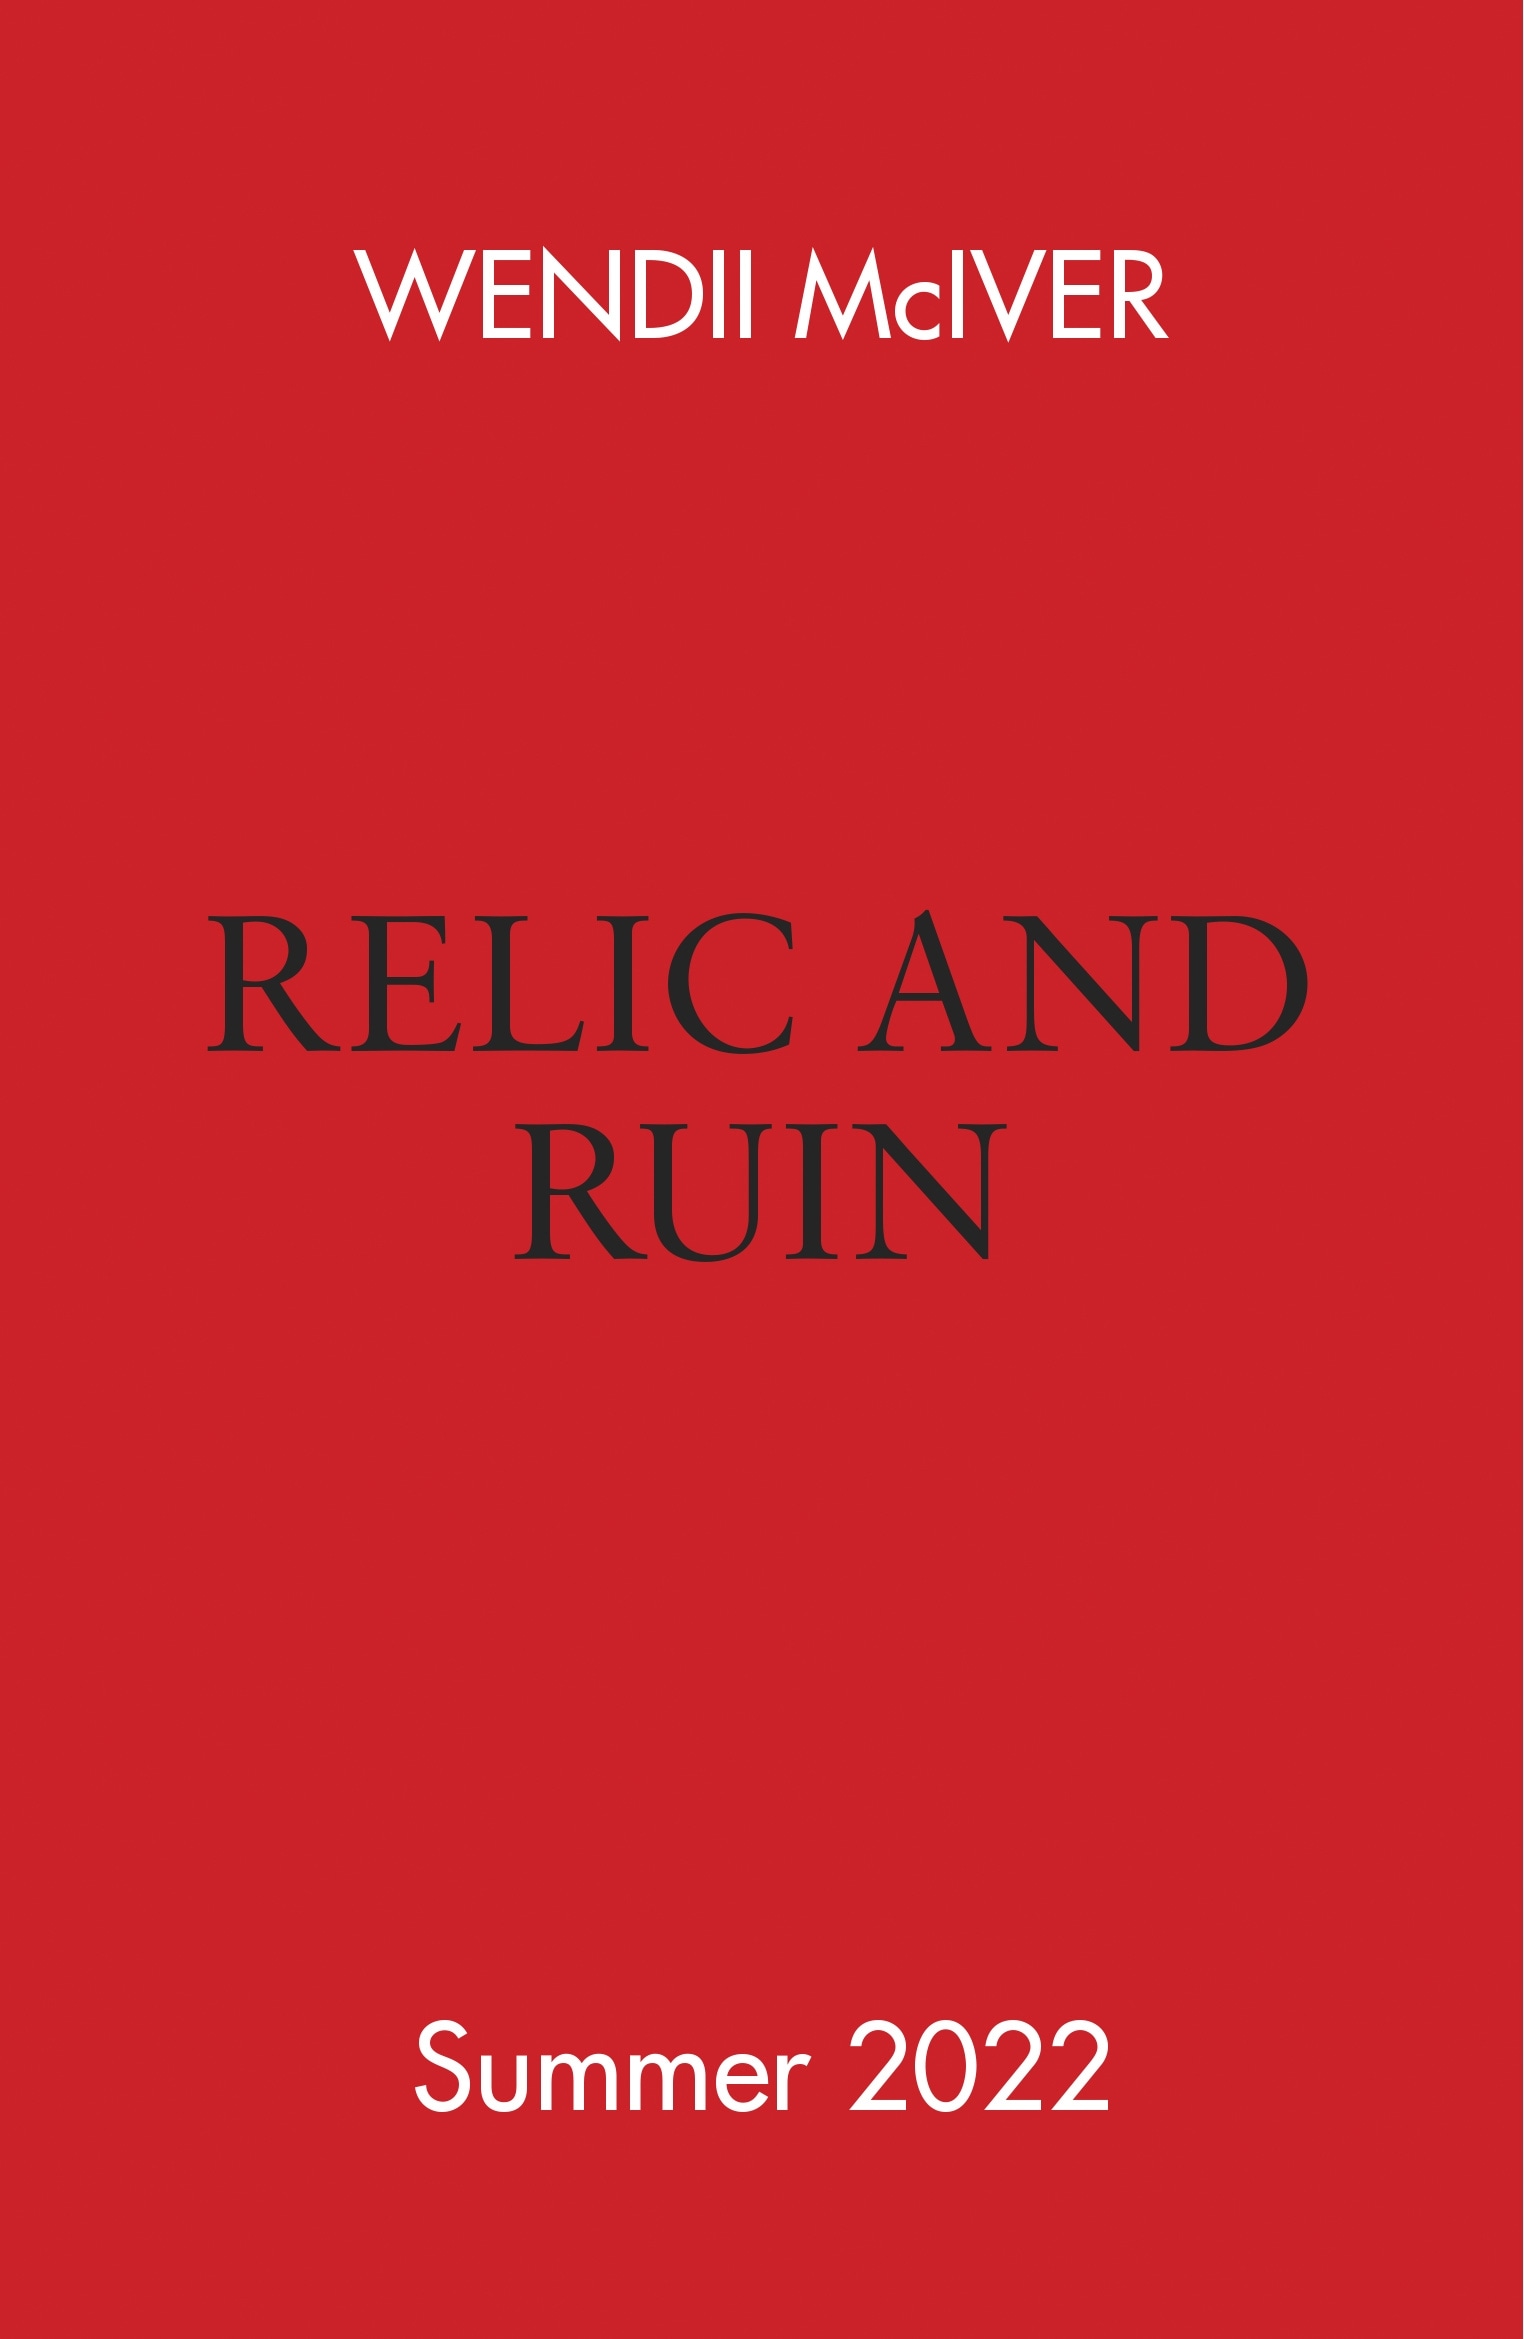 Book “Relic and Ruin” by Wendii McIver — June 7, 2022